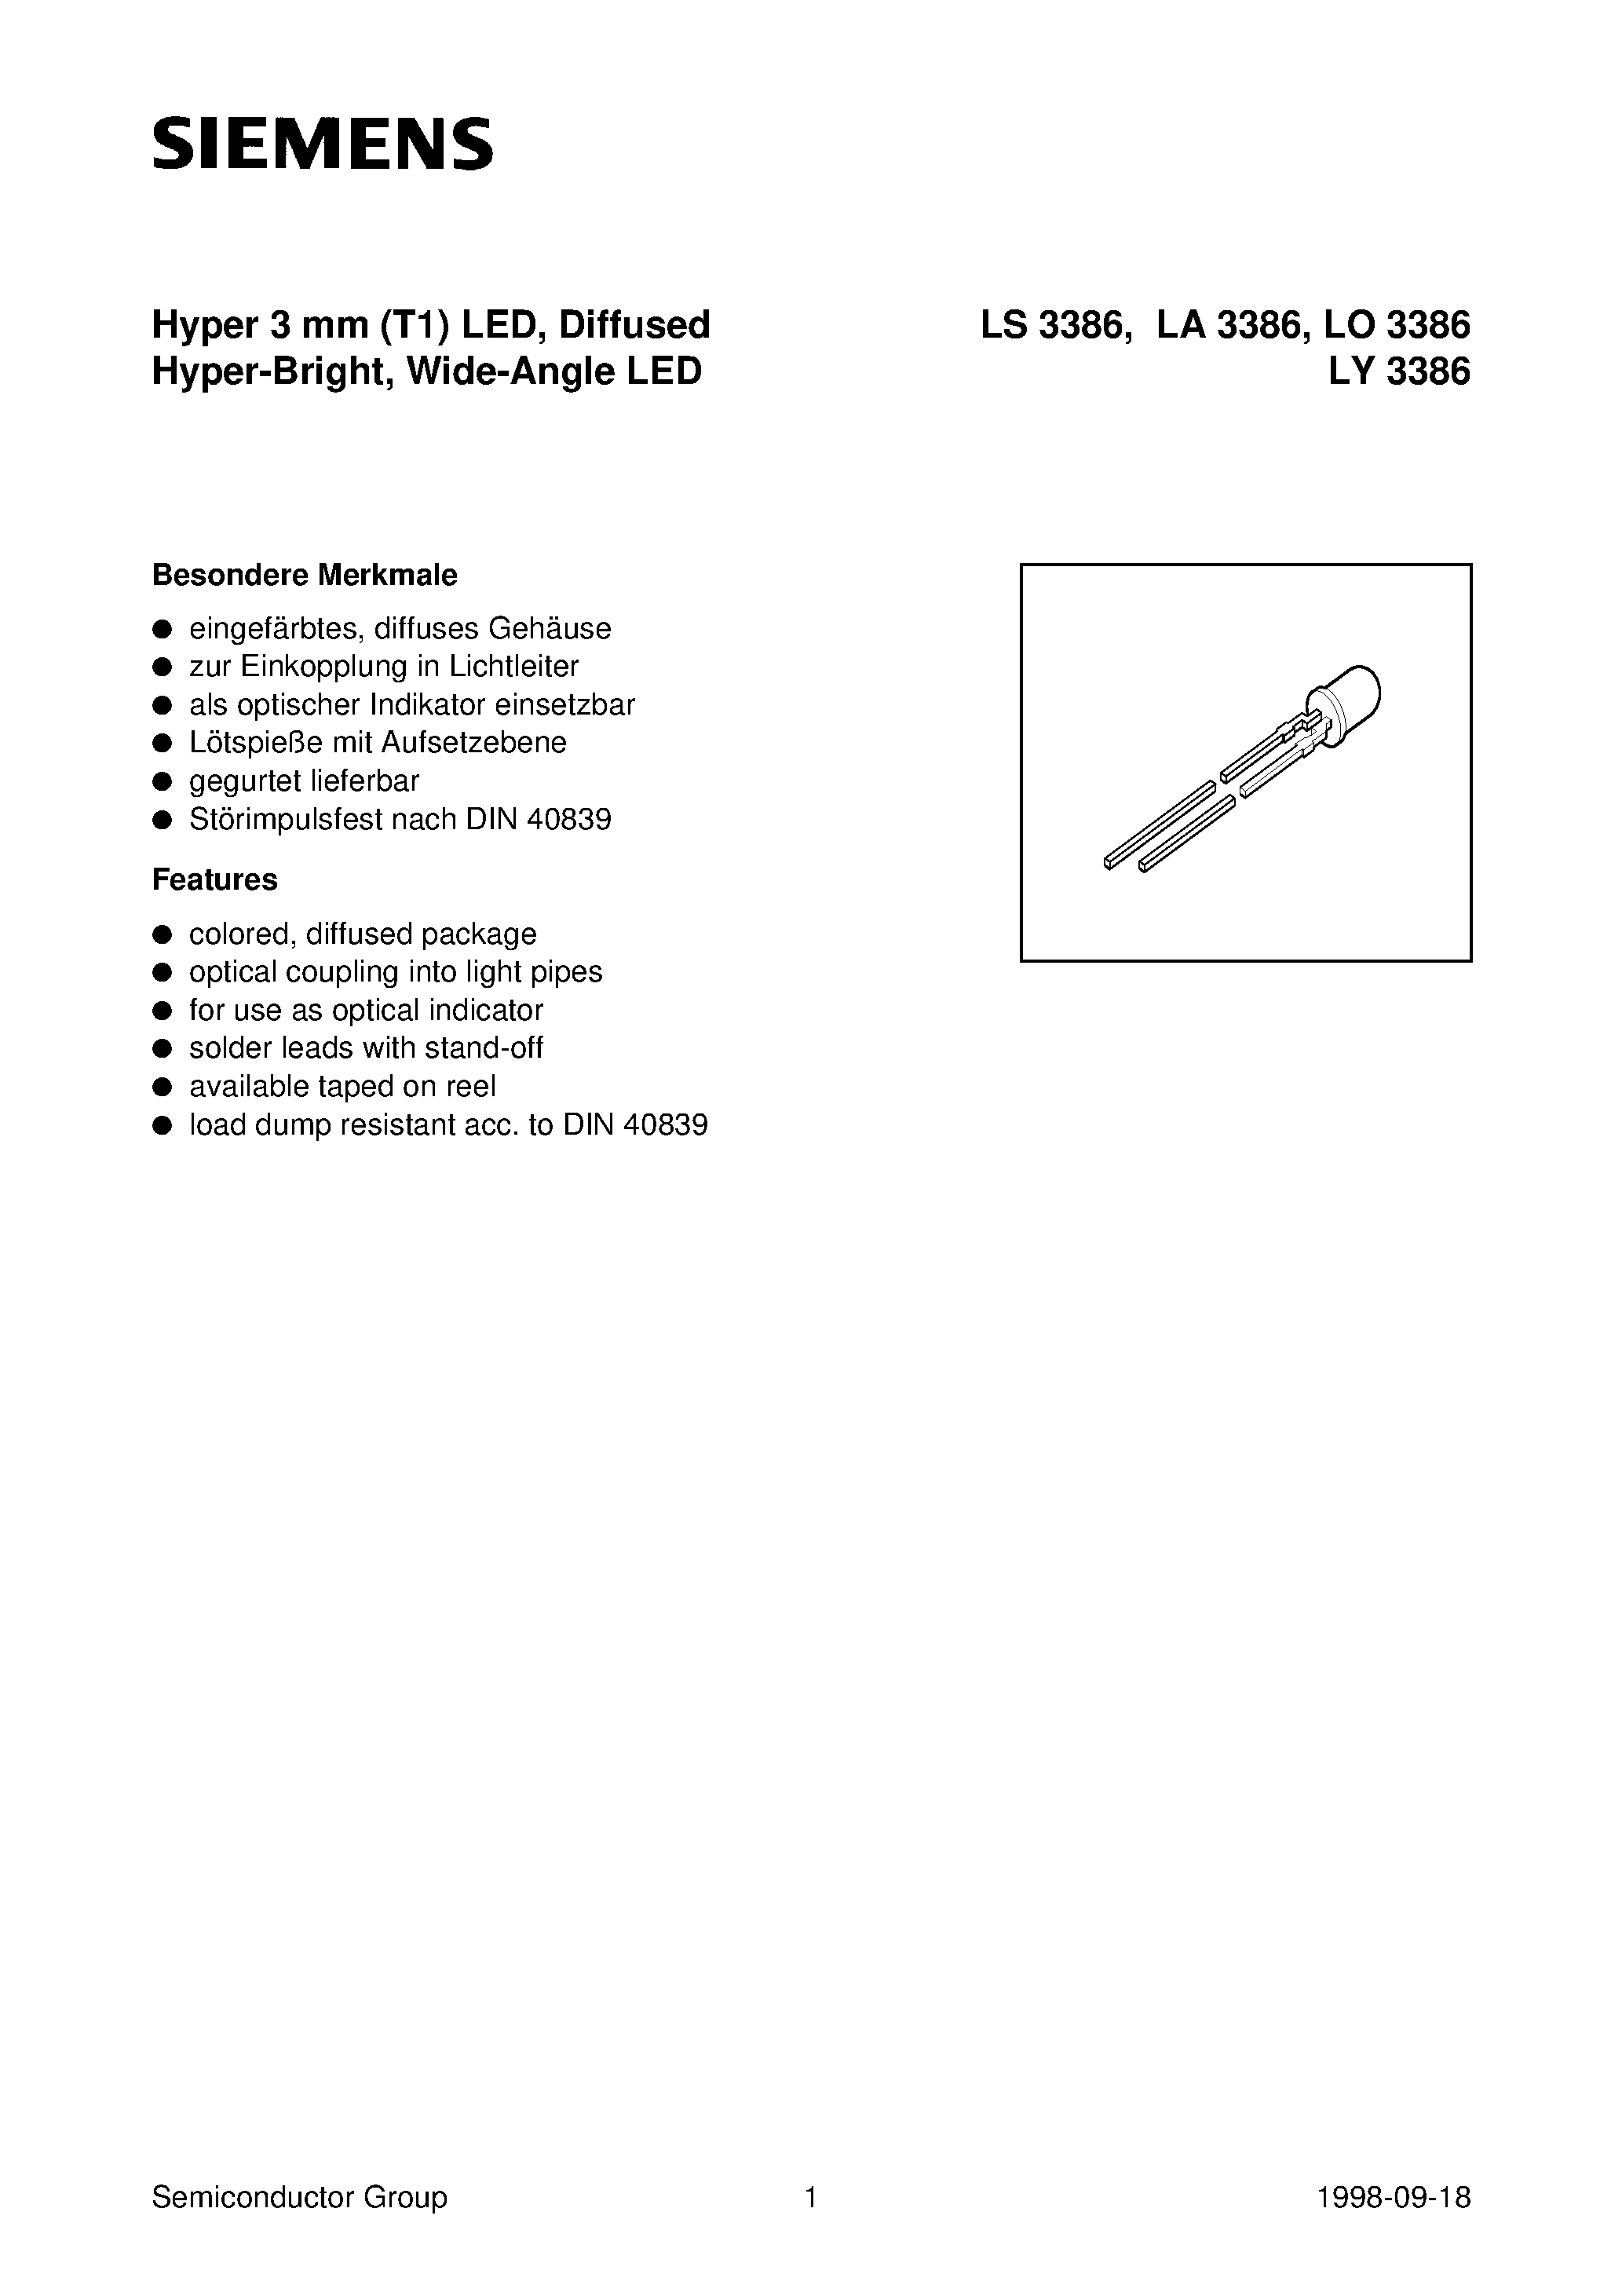 Datasheet LA3386-N - Hyper 3 mm T1 LED/ Diffused Hyper-Bright/ Wide-Angle LED page 1